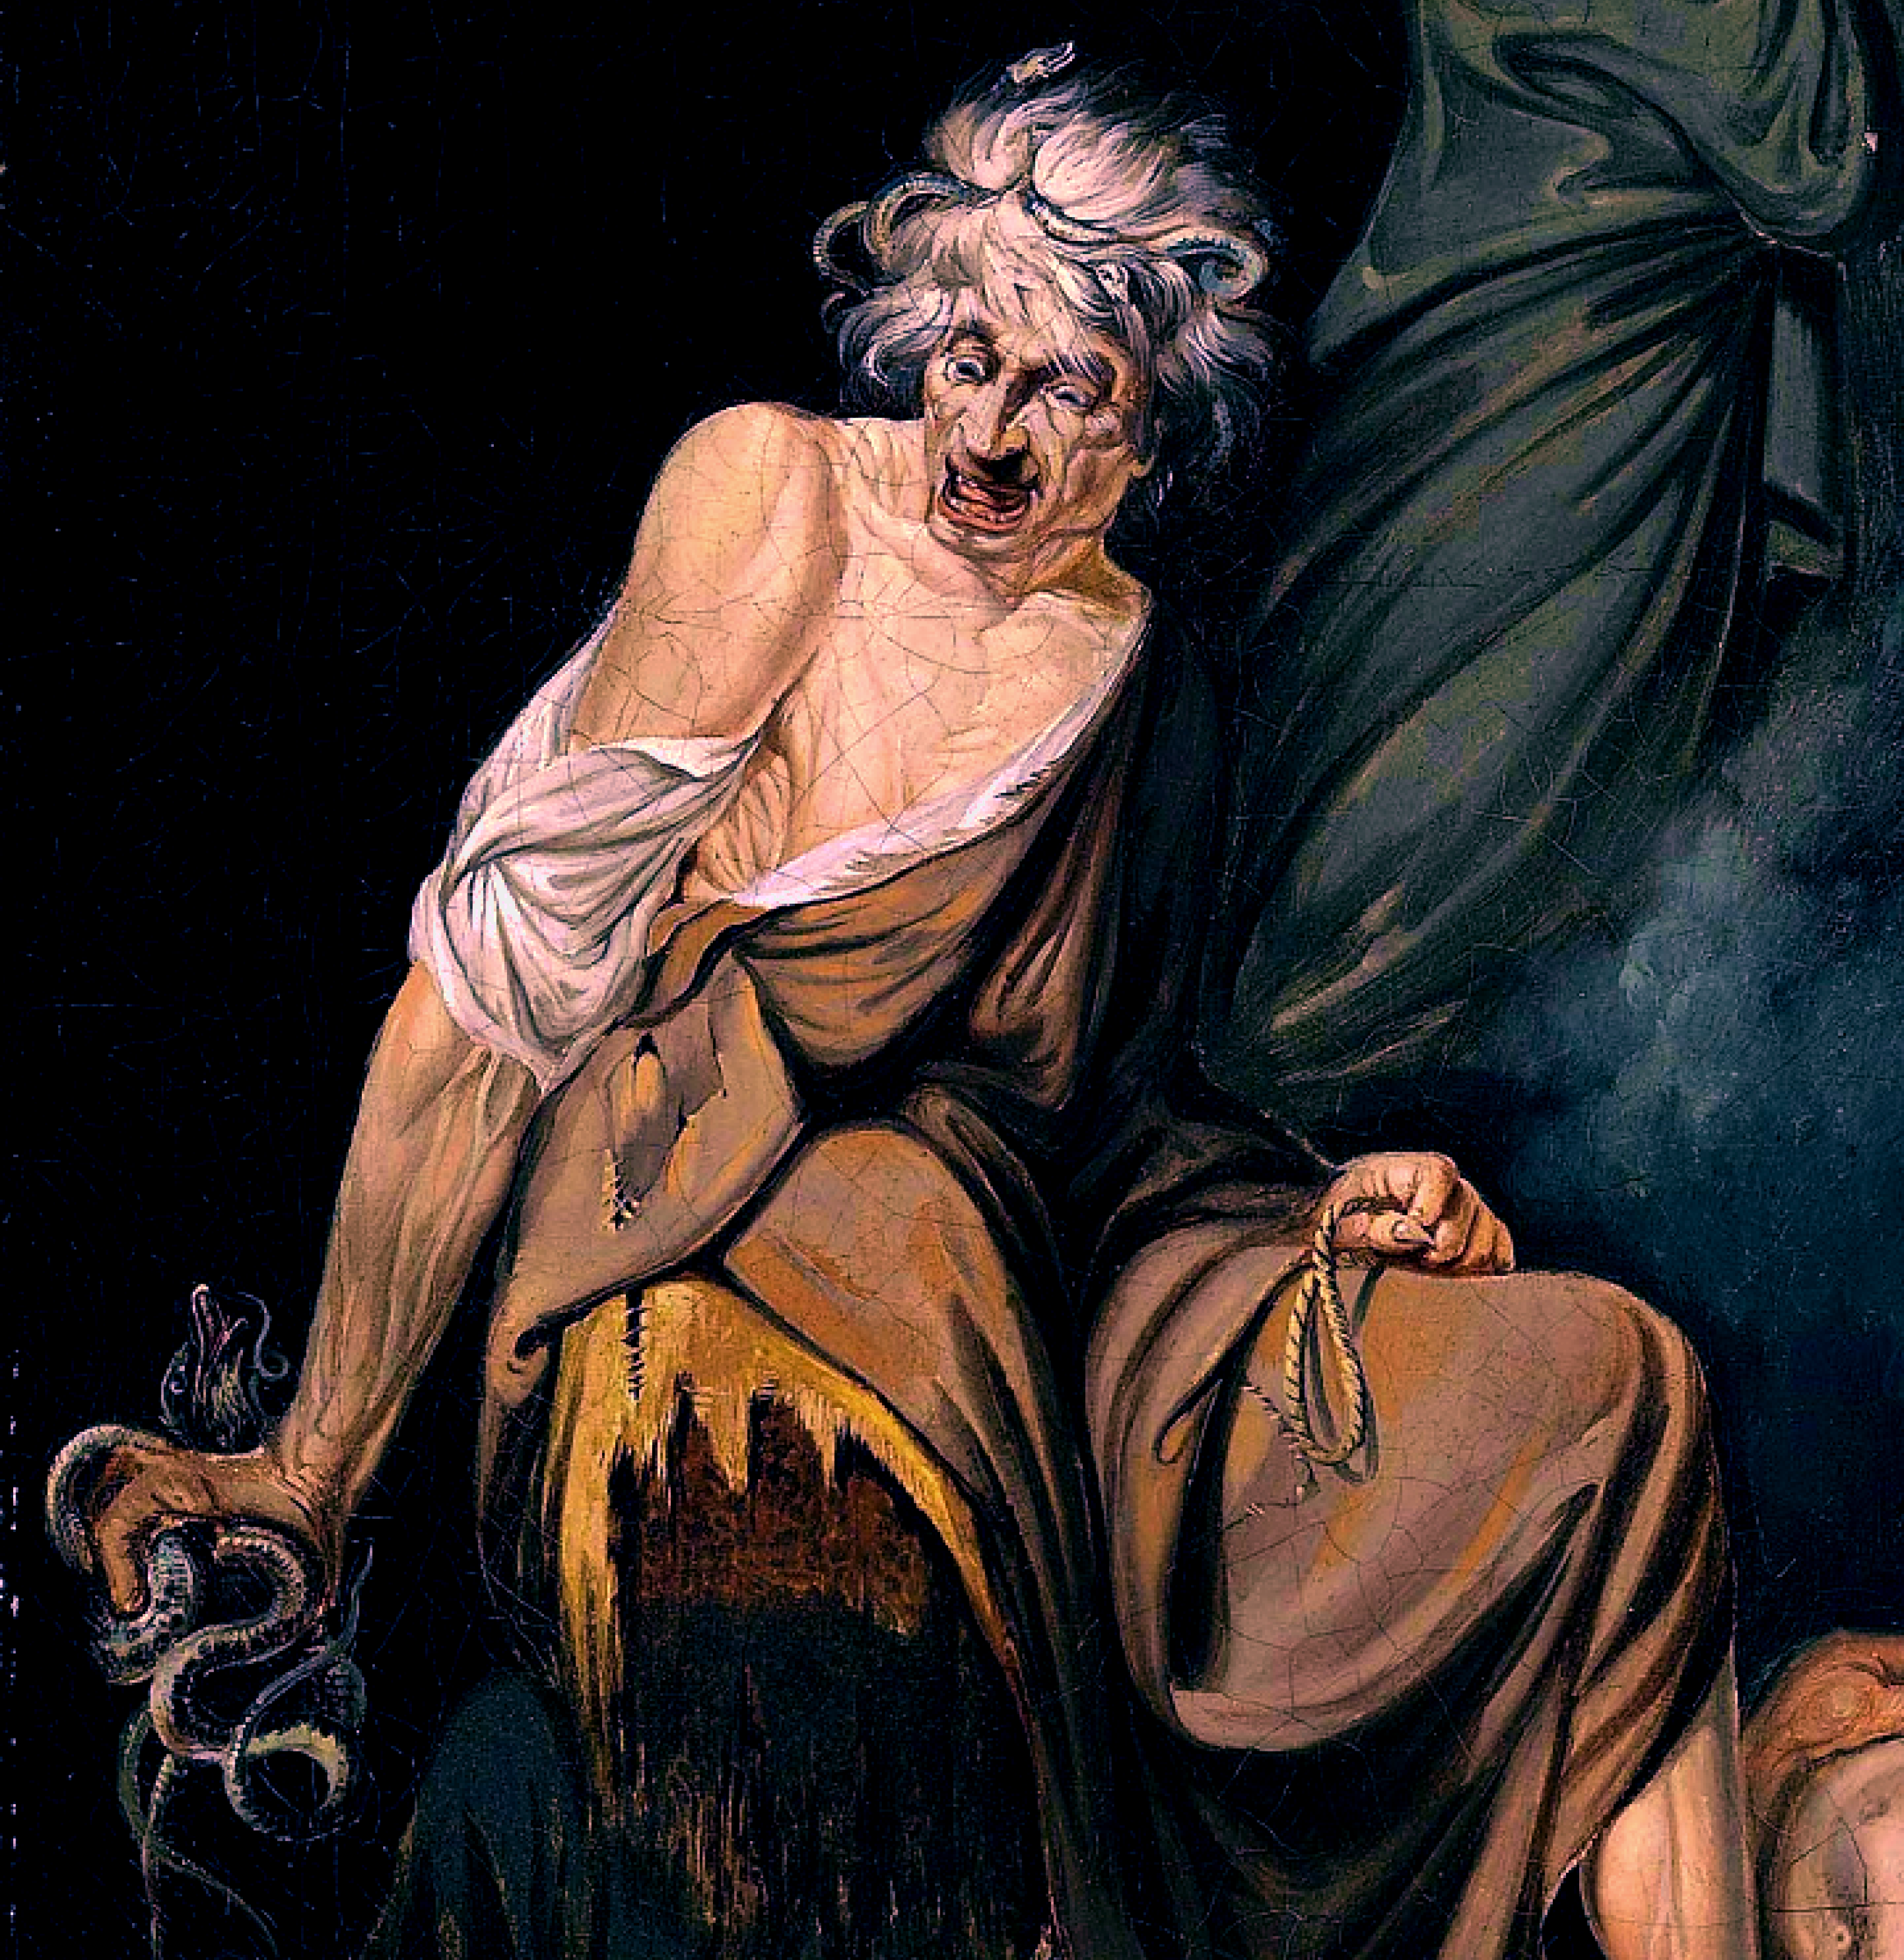 Ghastly painting of Erictho, holding snakes and a noose. She looks to be laughing.